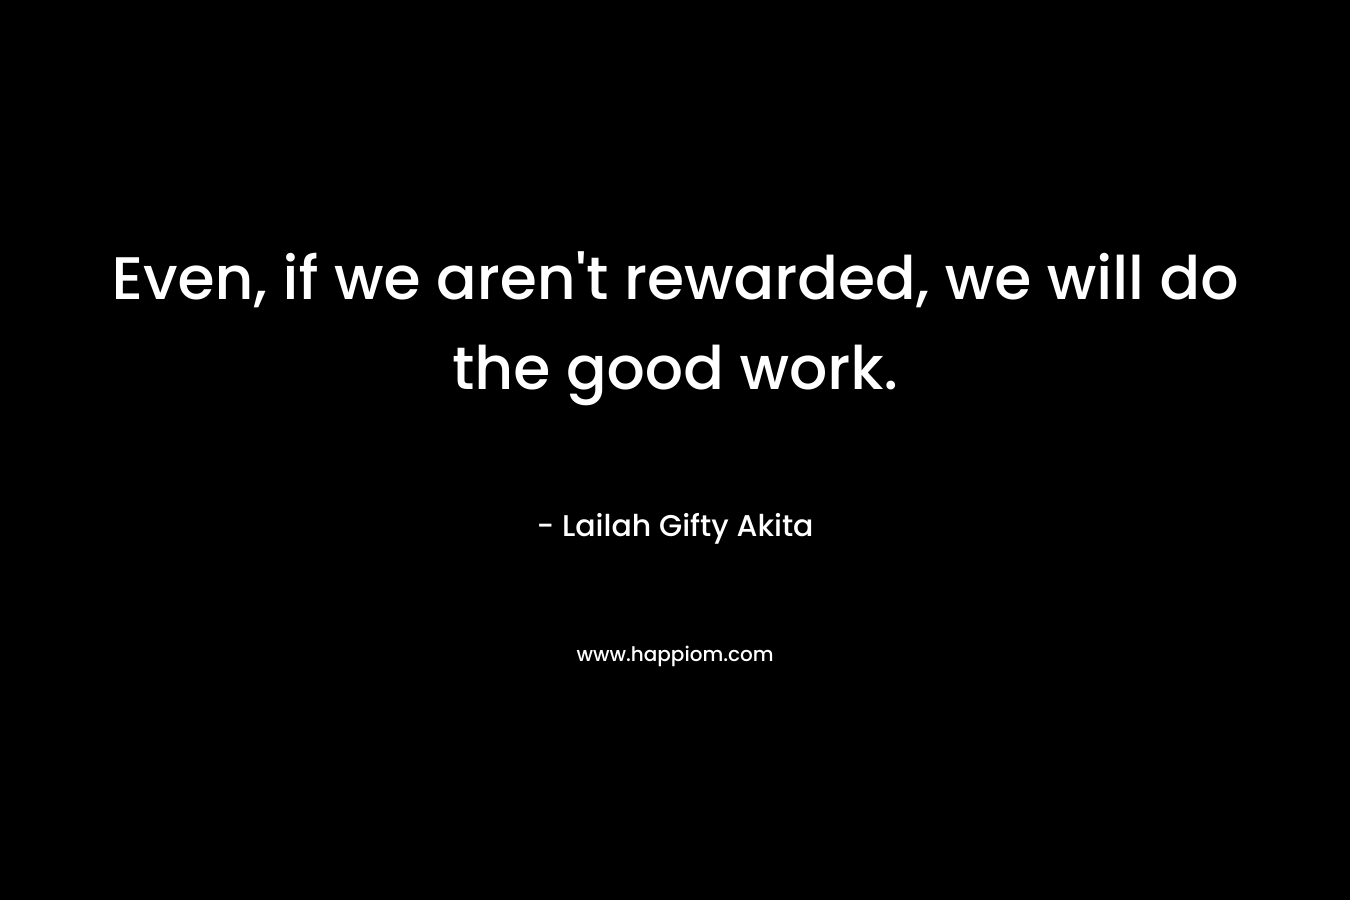 Even, if we aren’t rewarded, we will do the good work. – Lailah Gifty Akita